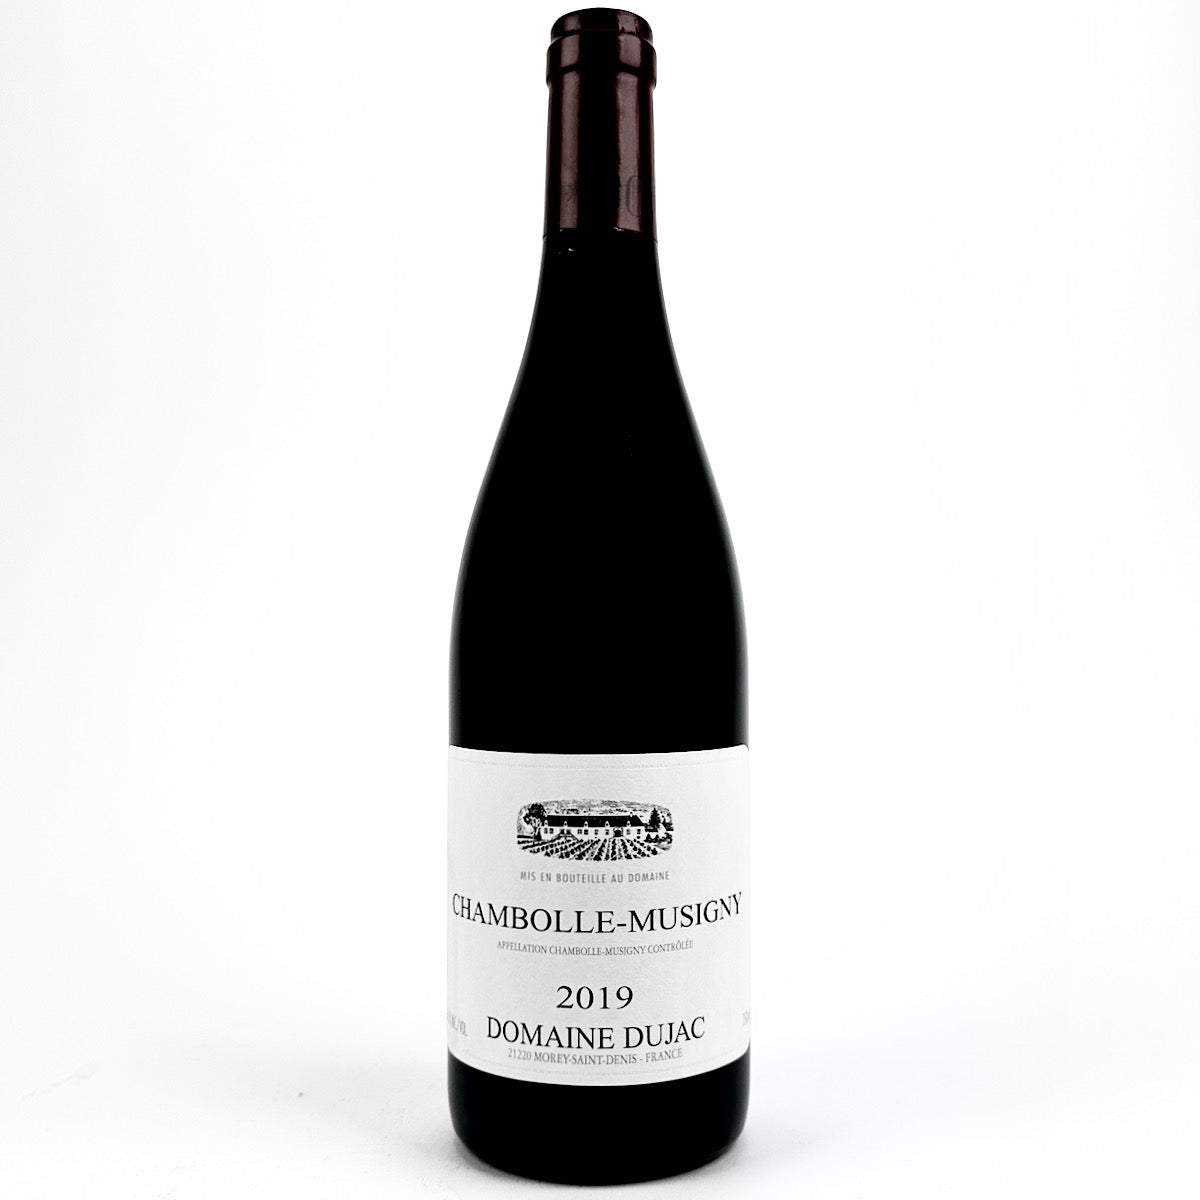 2019 Dujac Chambolle-Musigny